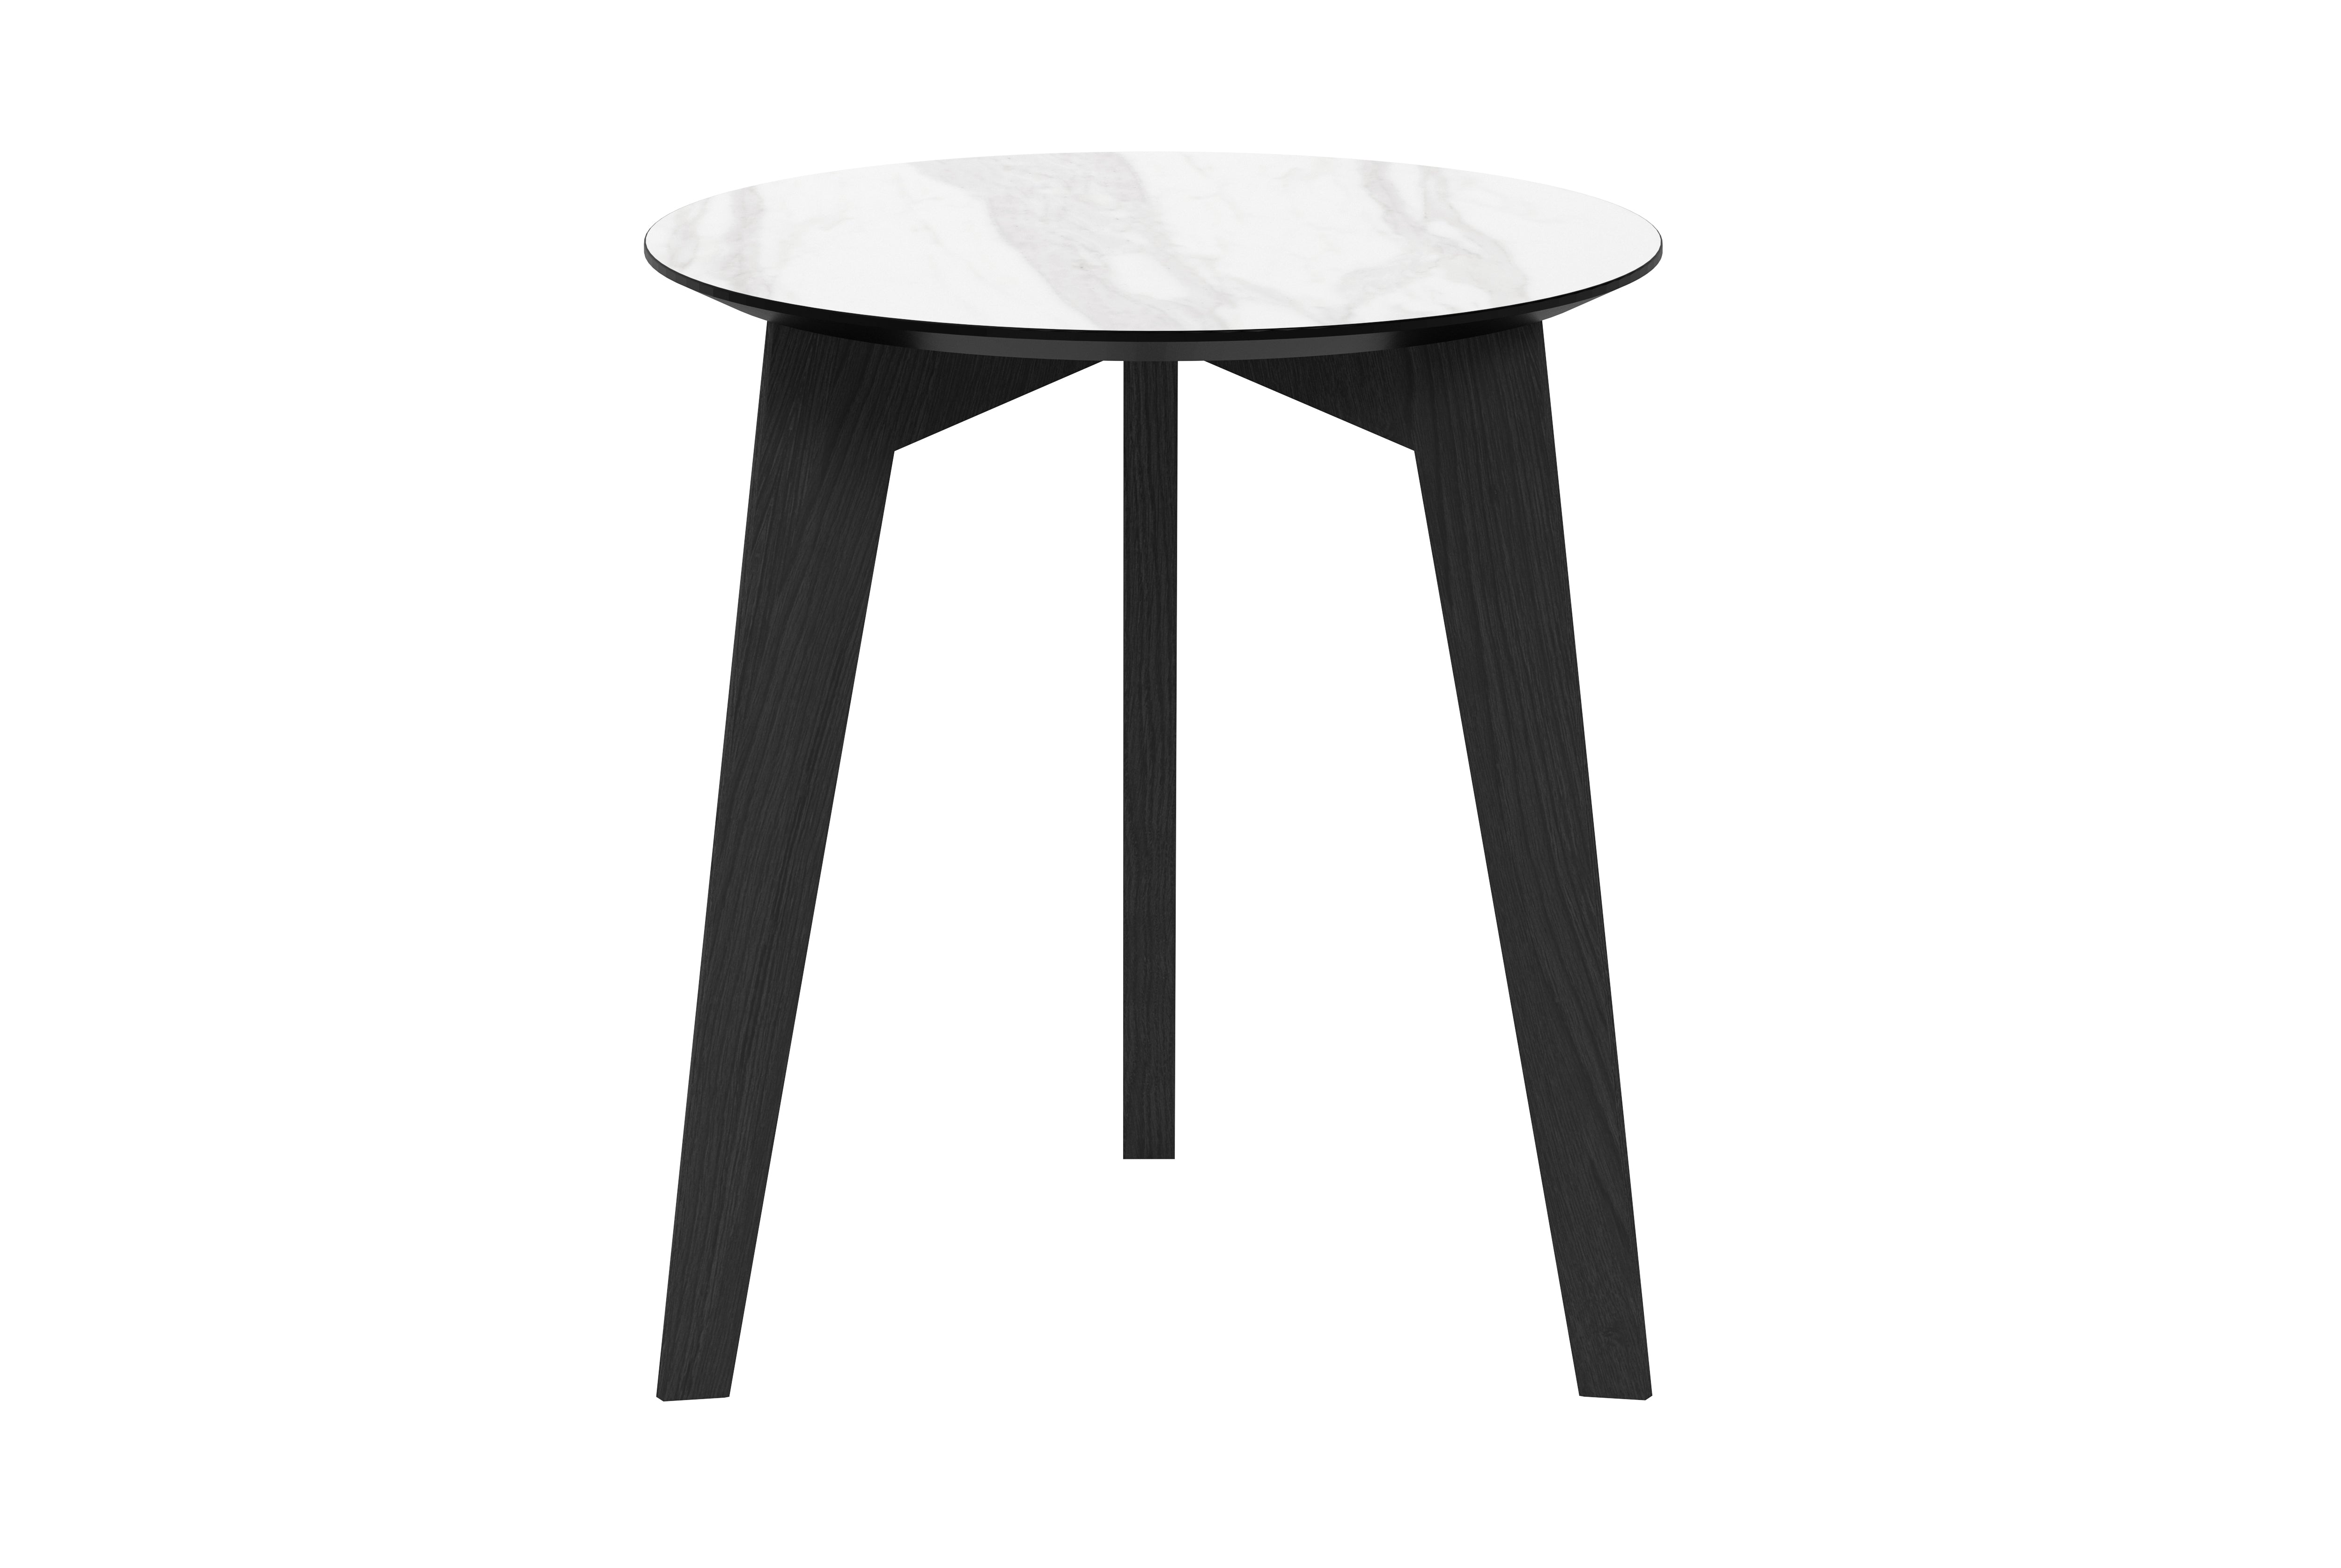 Malcolm Corner Table Round - White Marble (4922284933222)